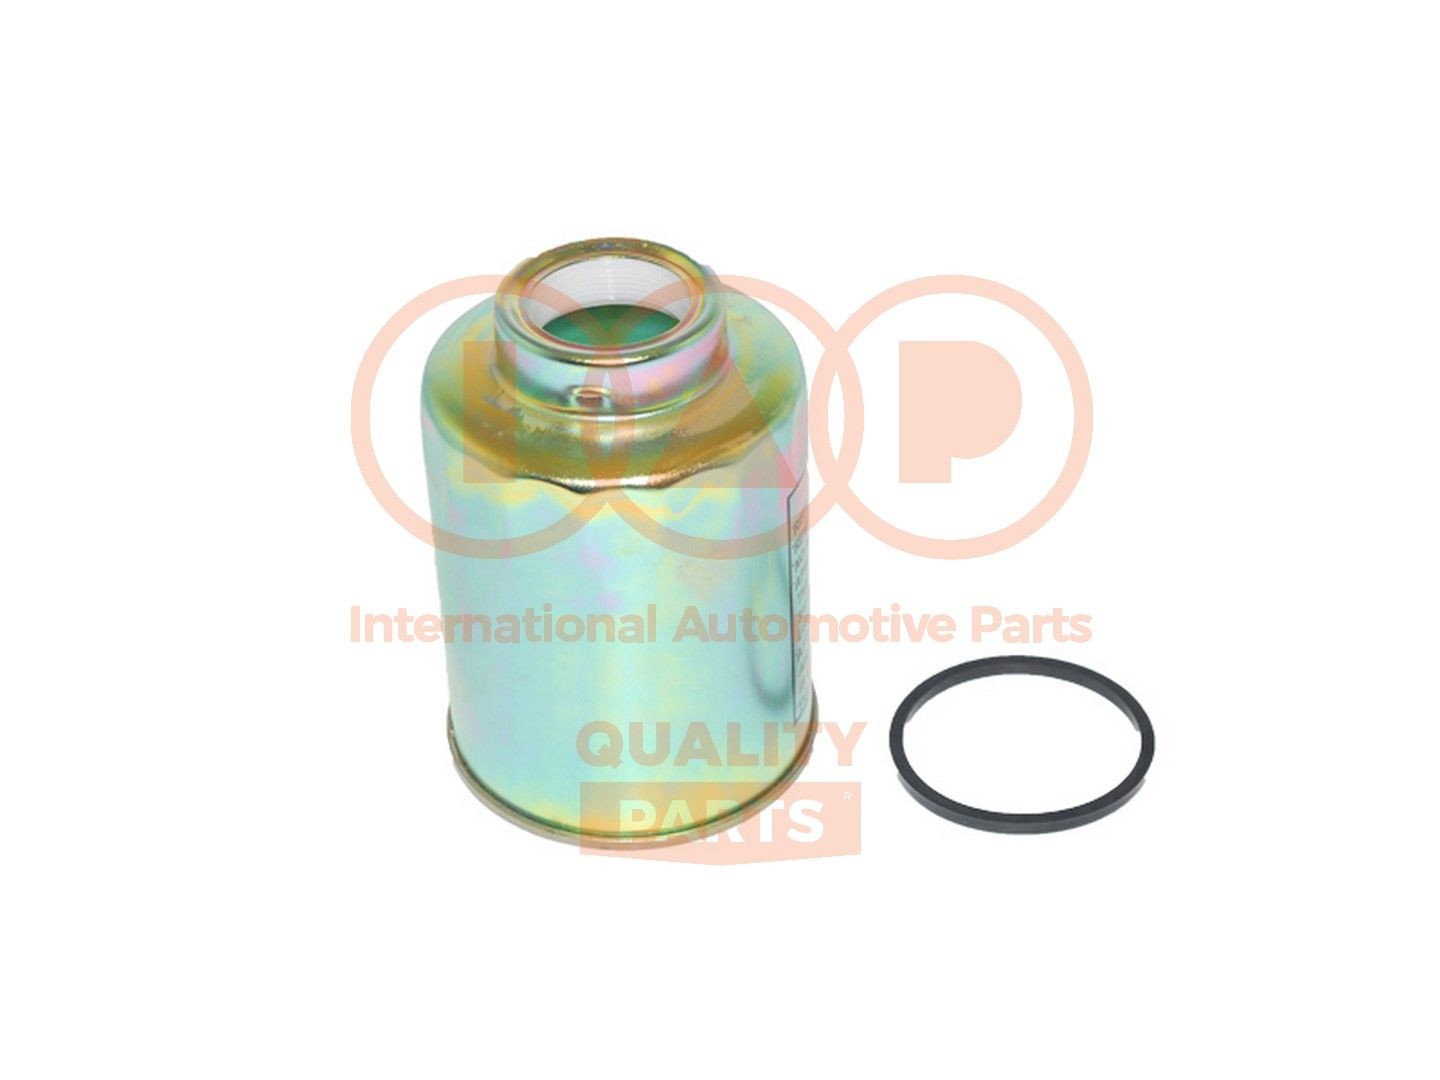 Great value for money - IAP QUALITY PARTS Fuel filter 122-04030